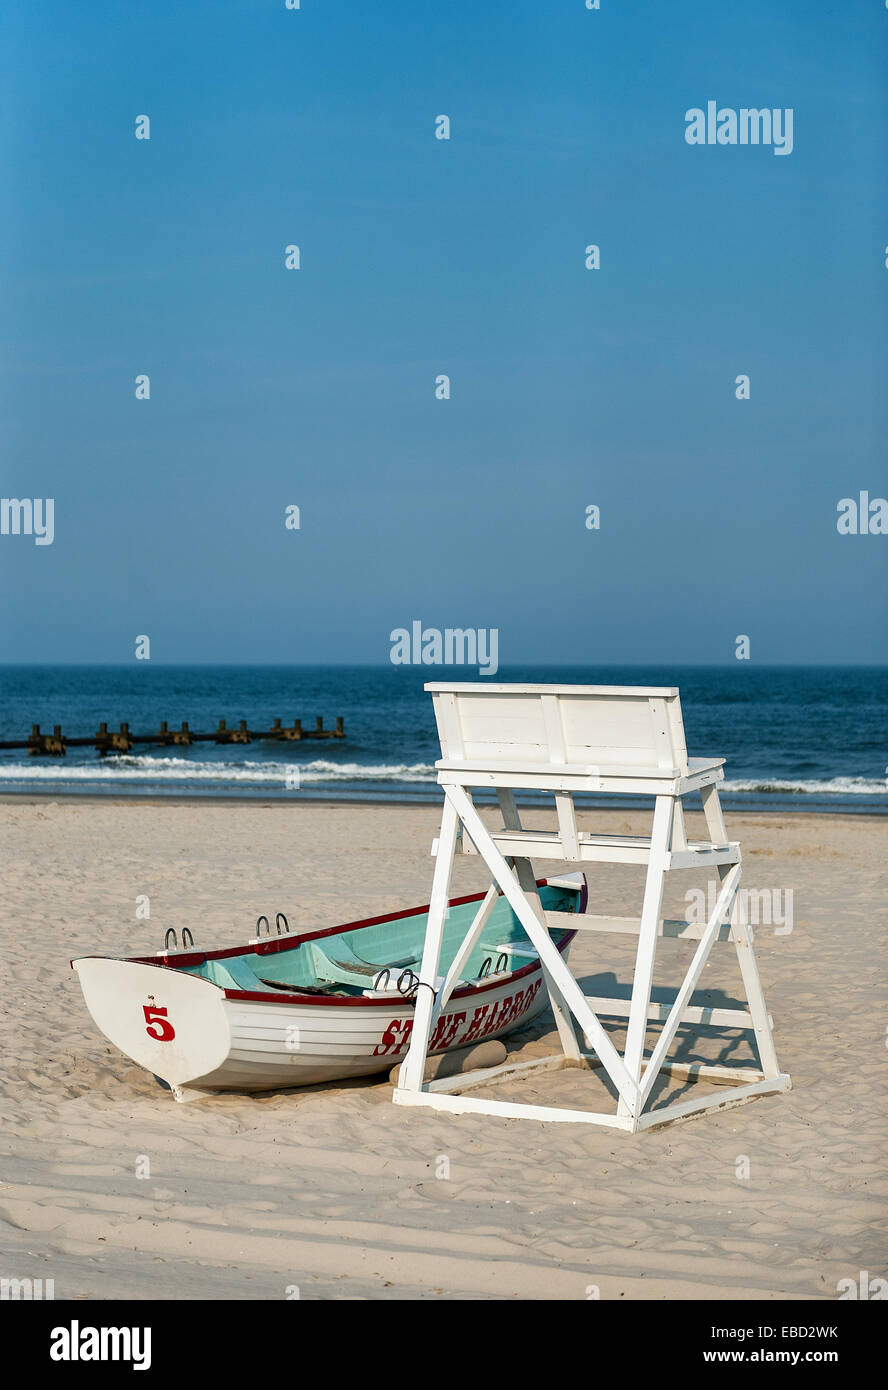 Lifegaurd stand and rescue boat on beach, Stone Harbor, New Jersey, USA Stock Photo